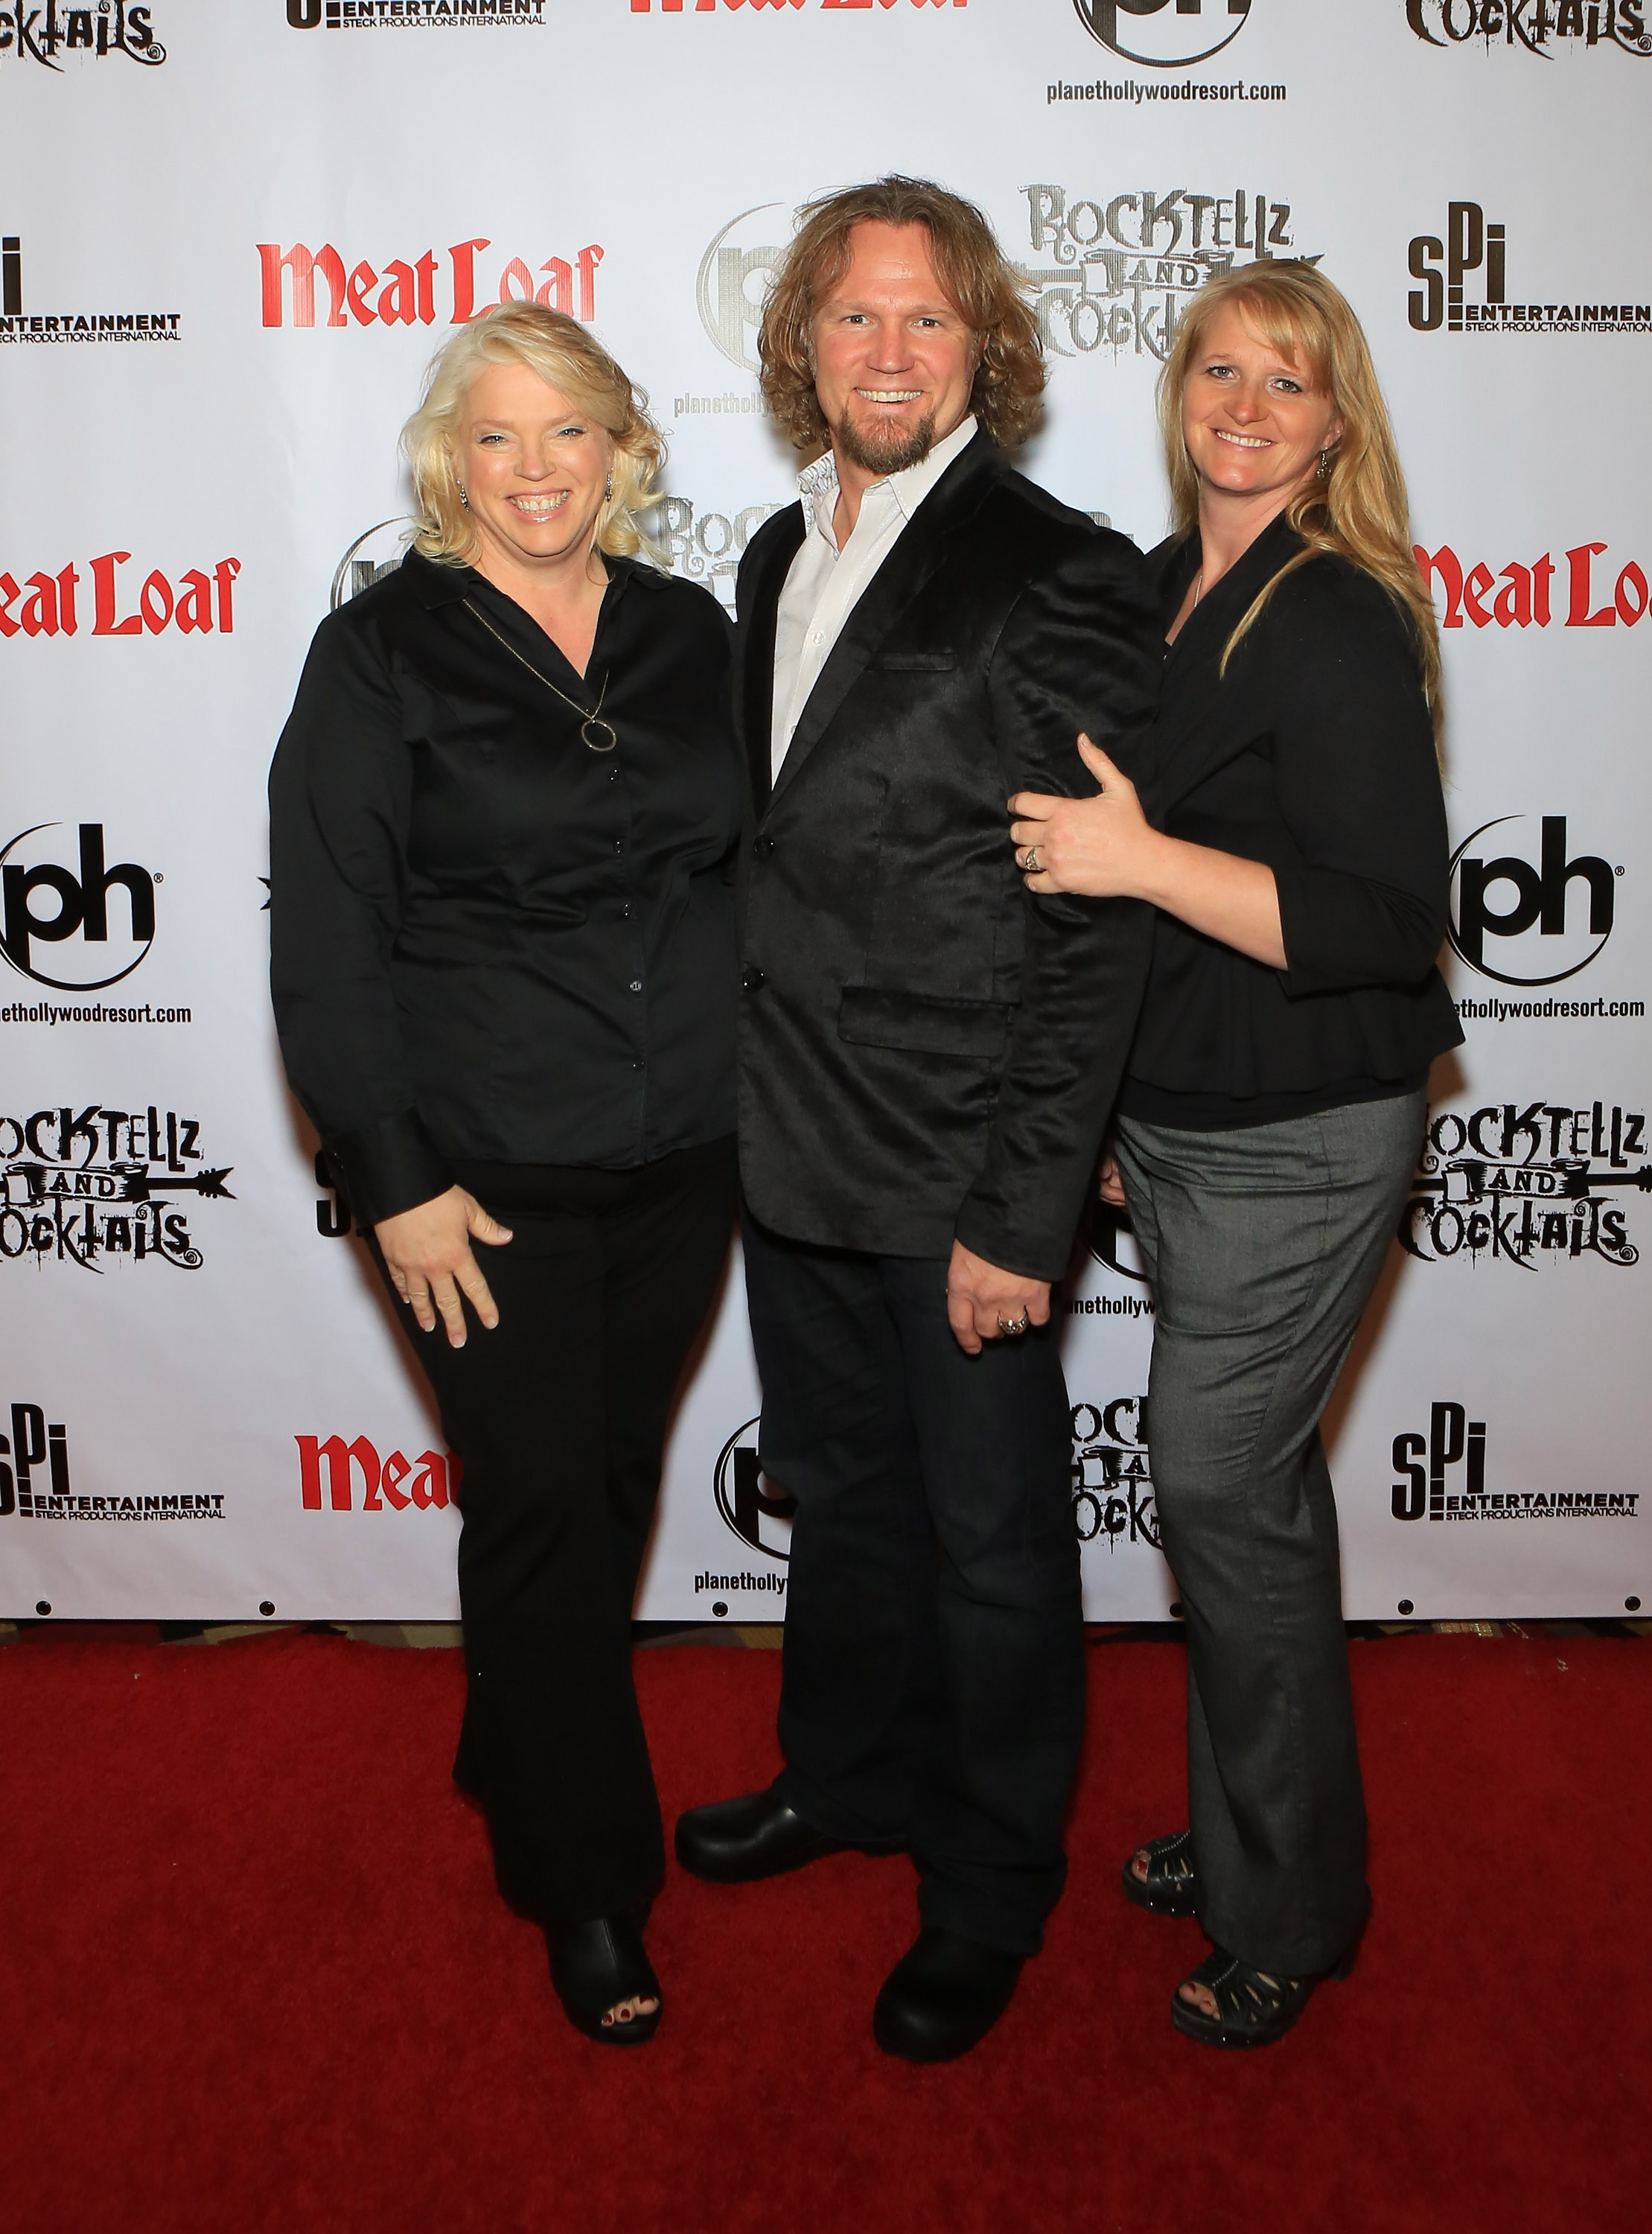 Janelle Brown, Kody Brown and Christine Brown arrive at 'Rocktellz Cocktails Presents Meat Loaf' at Planet Hollywood Resort and Casino 